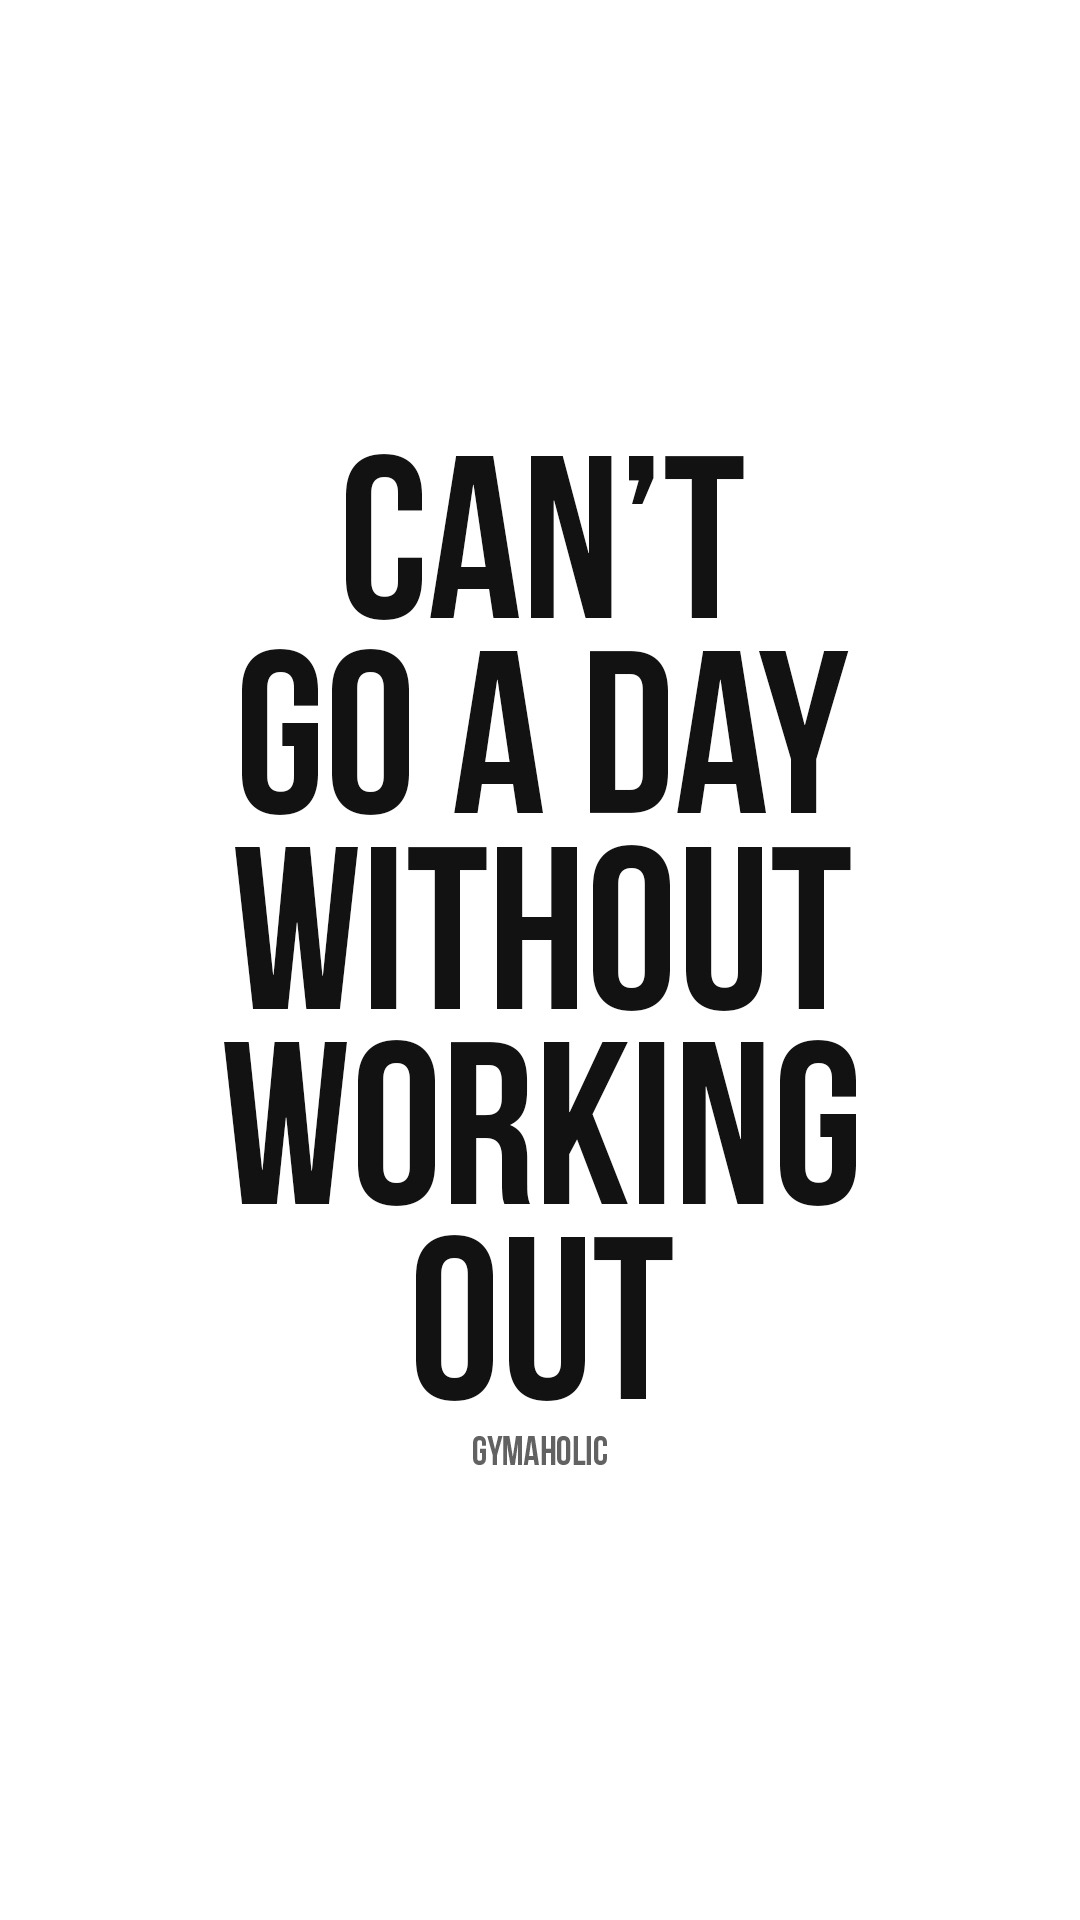 Can’t go a day without working out